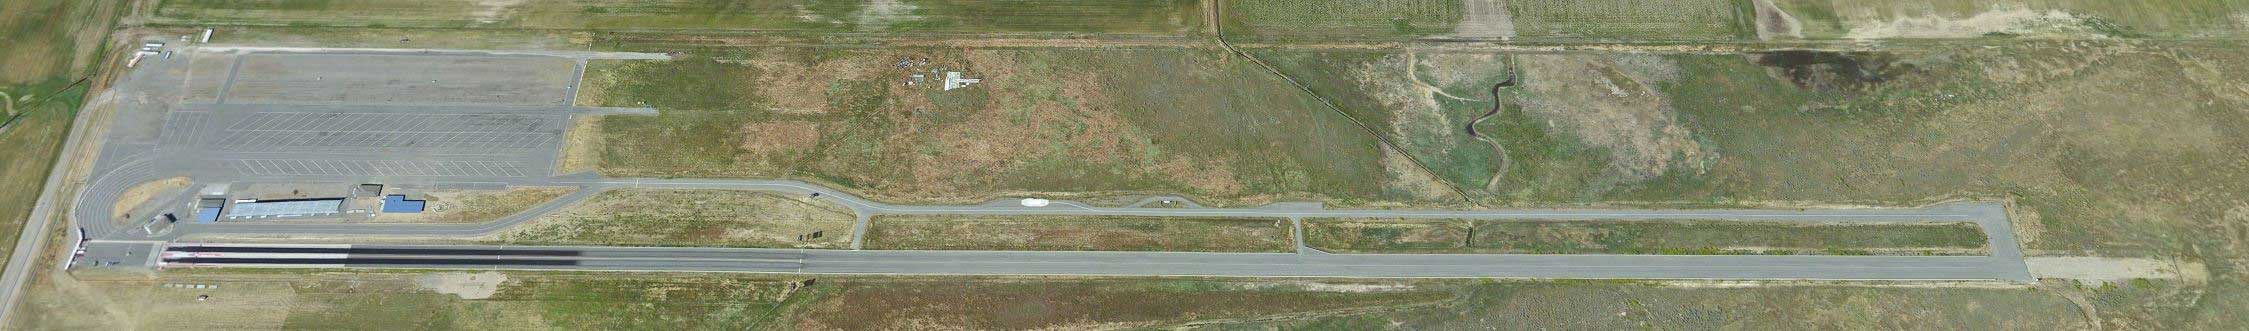 Legacy Trucking Proving Grounds Aerial view